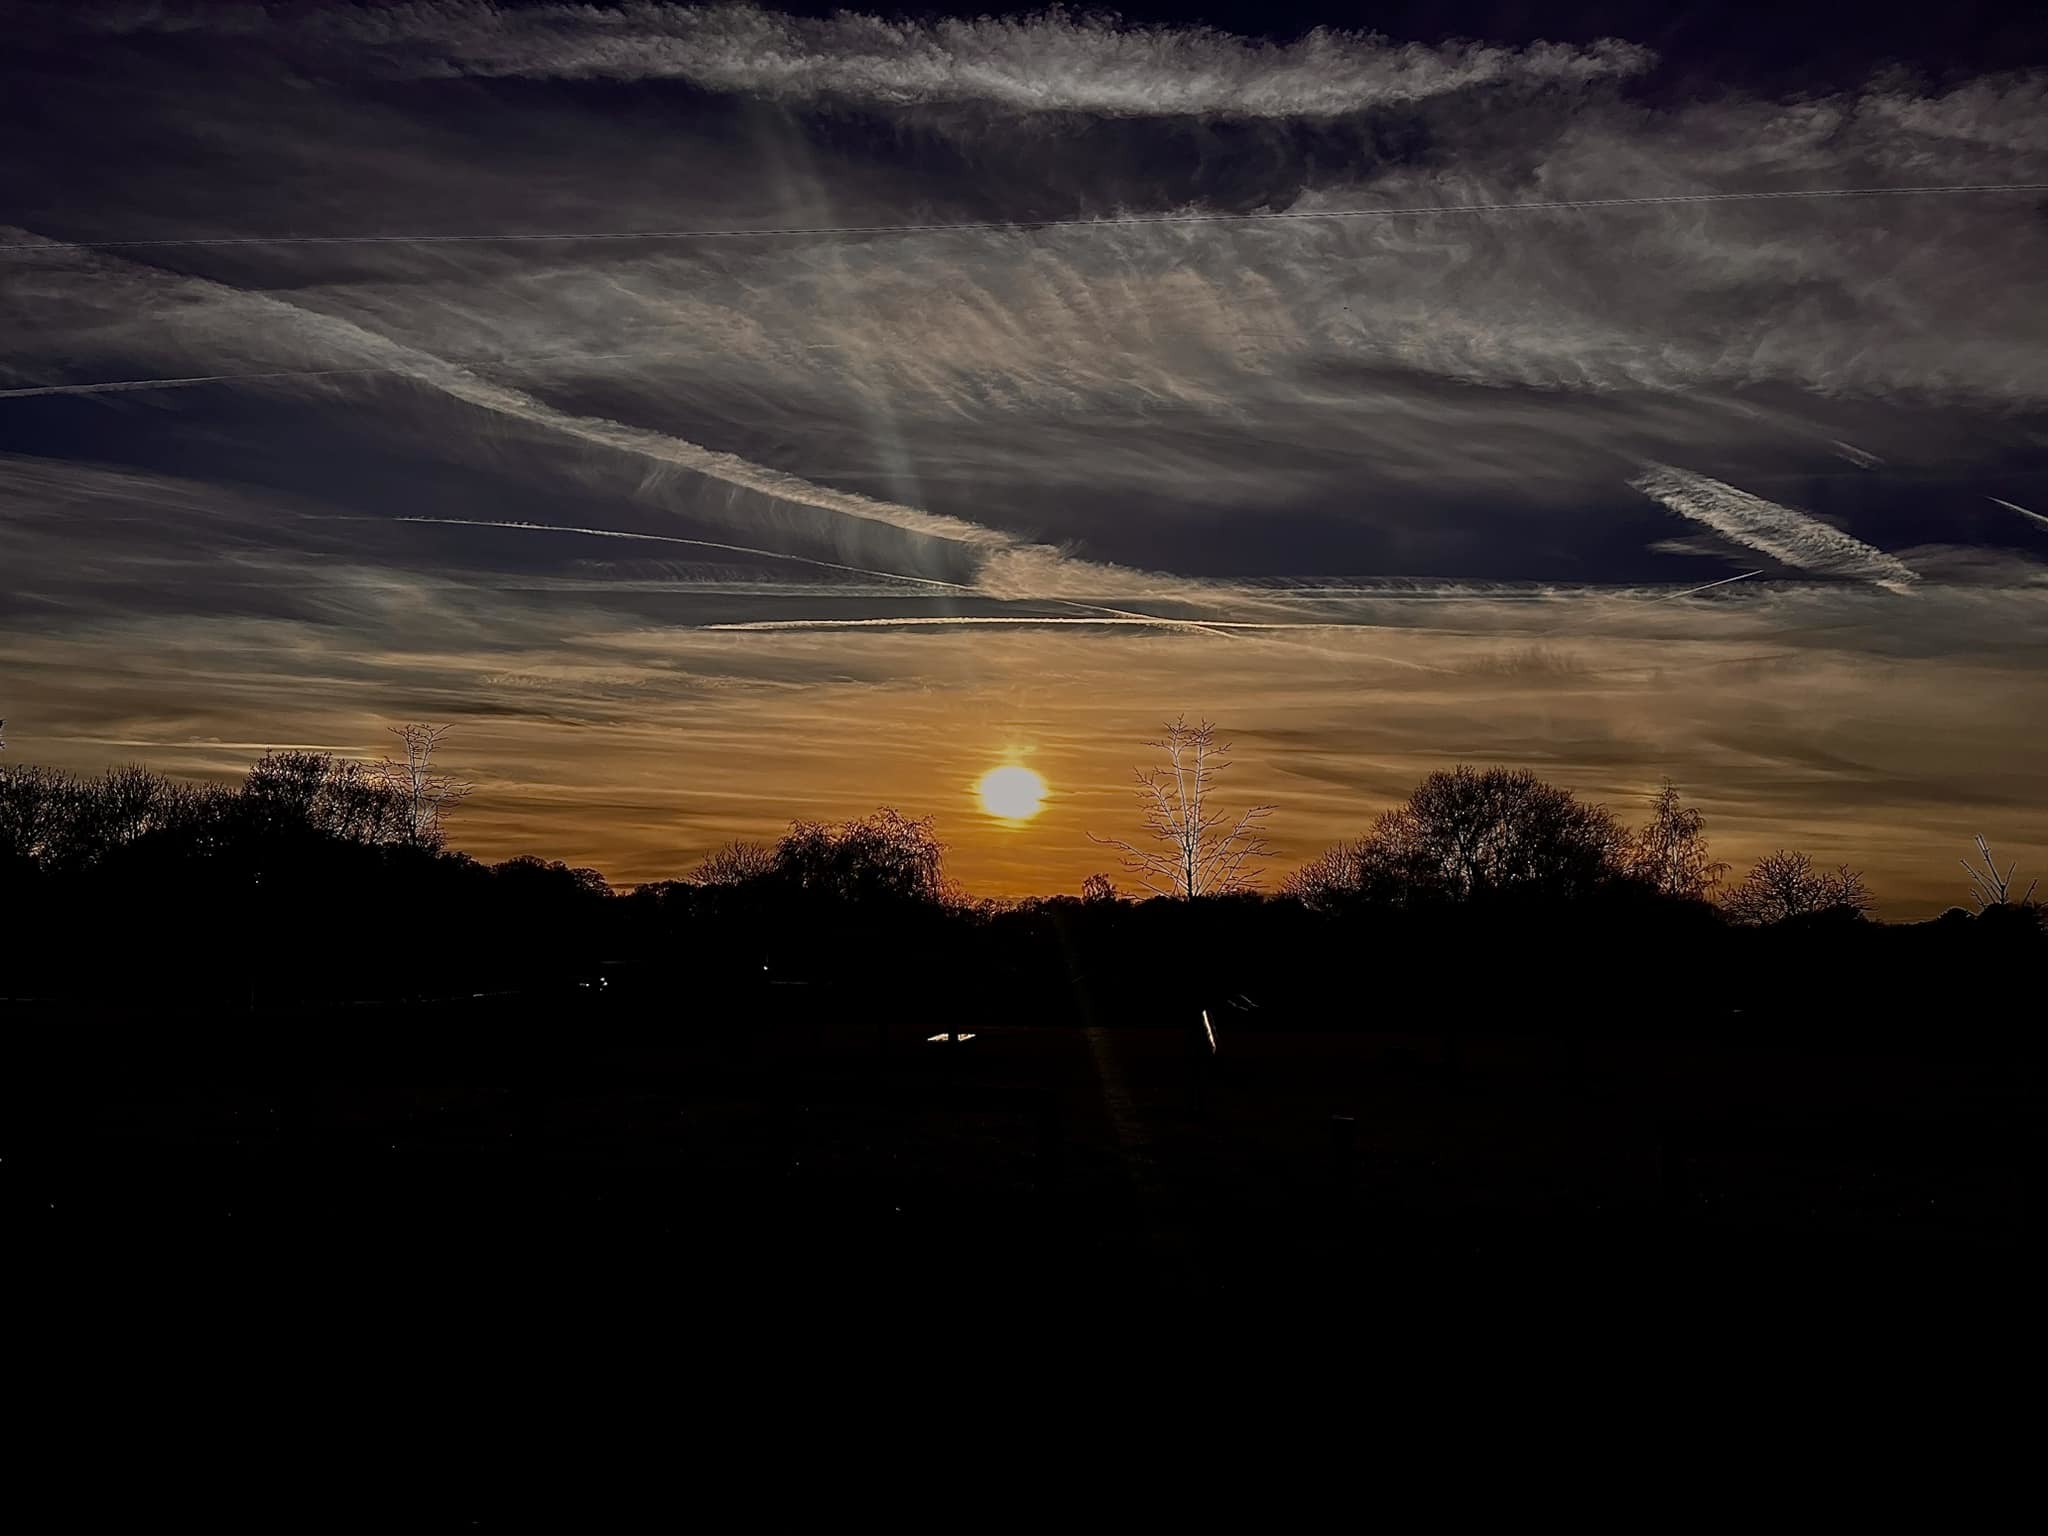 Sunset over Knutsford by Carly Jo Curbishley